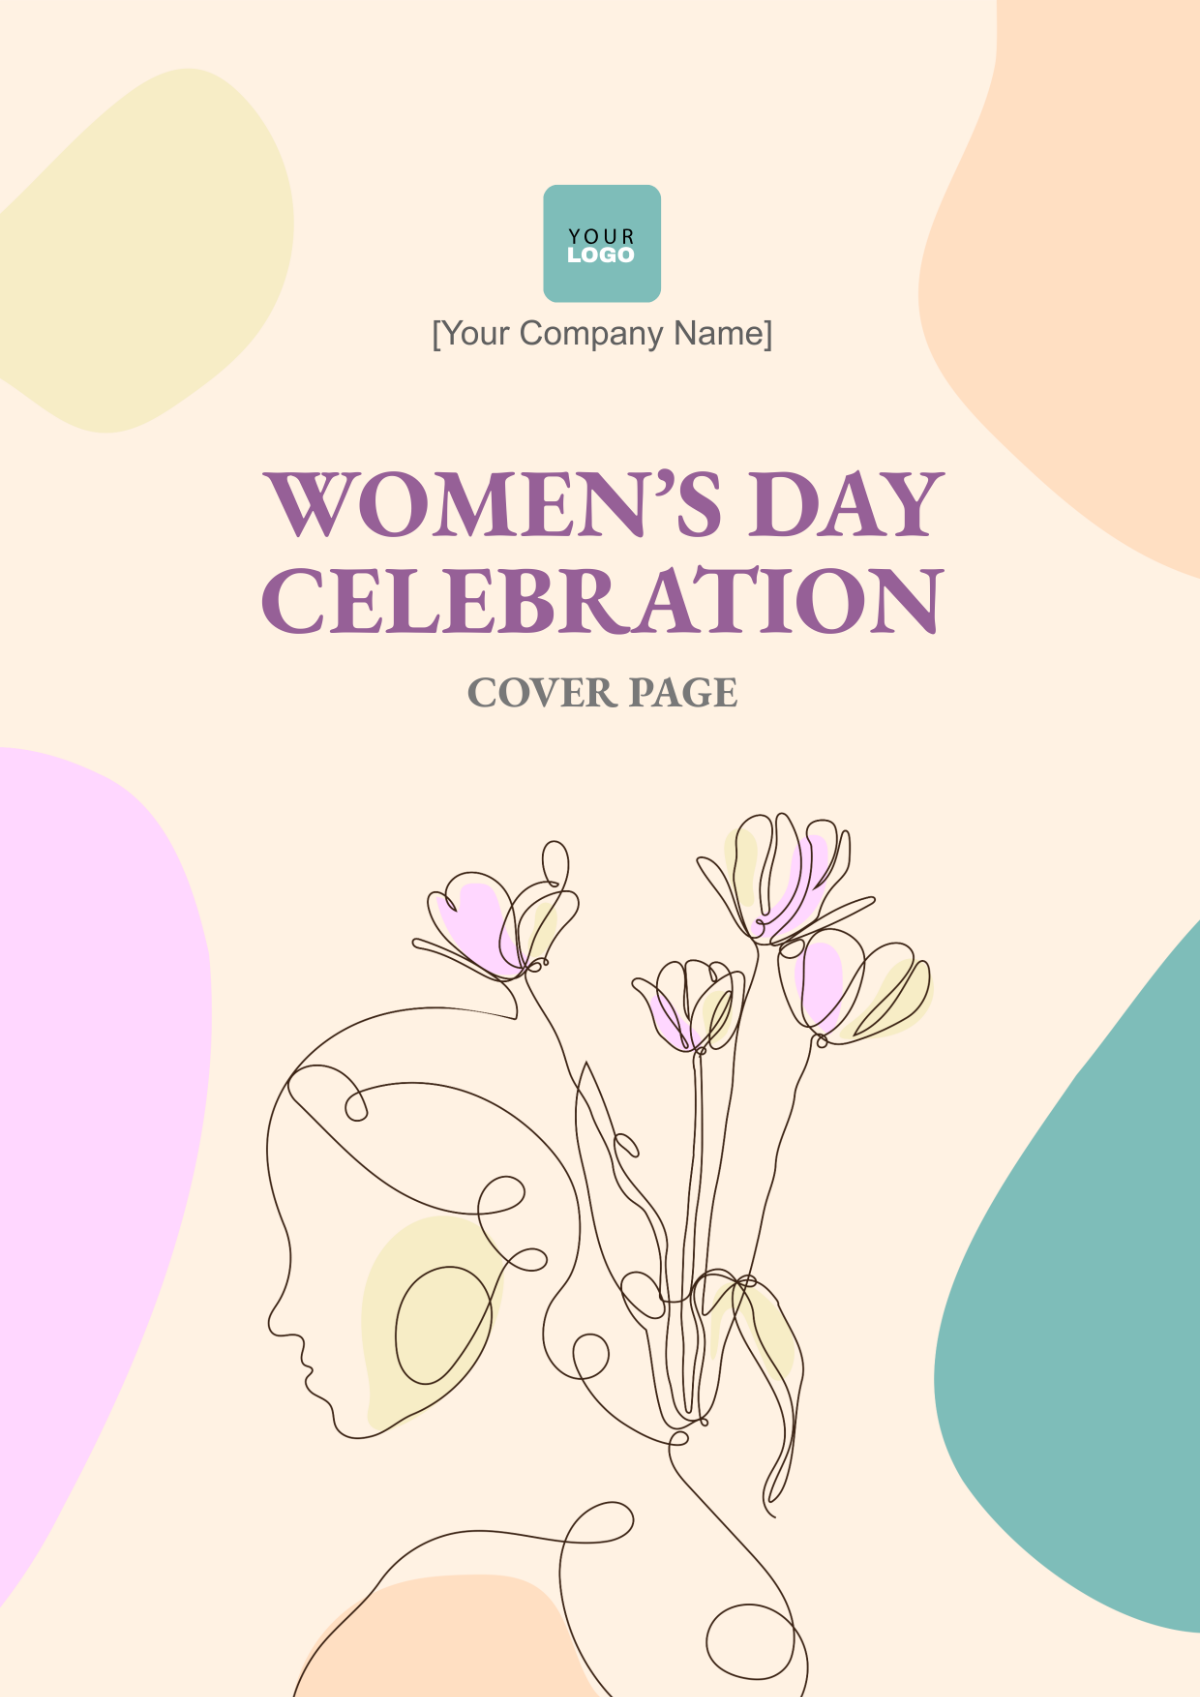 Women's Day Celebration Cover Page Template